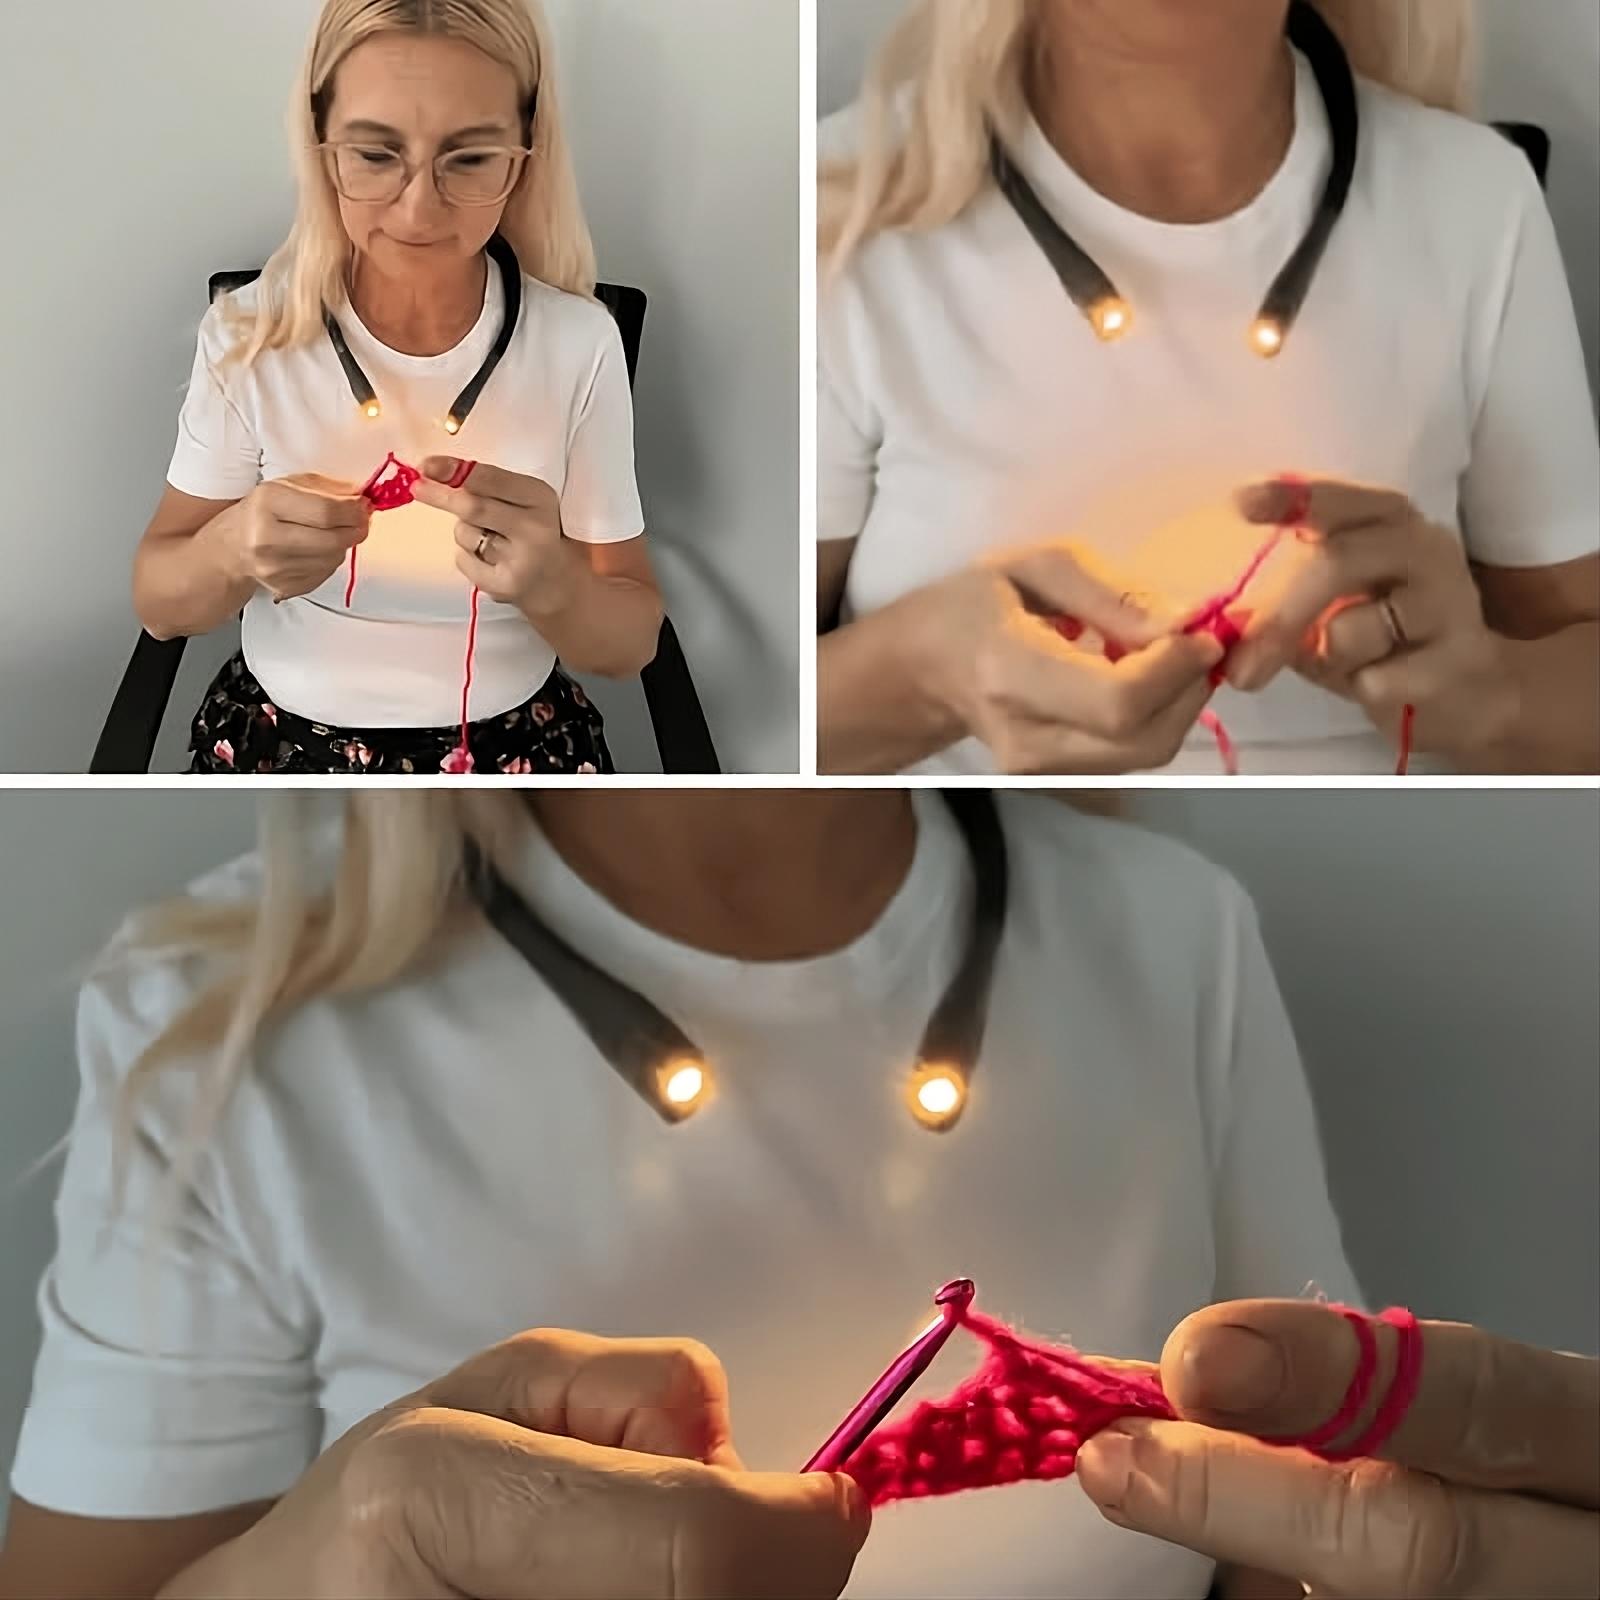 A person crafting with red yarn under a Crocheting/Knitting Neck Lamp, demonstrated in a three-step collage.